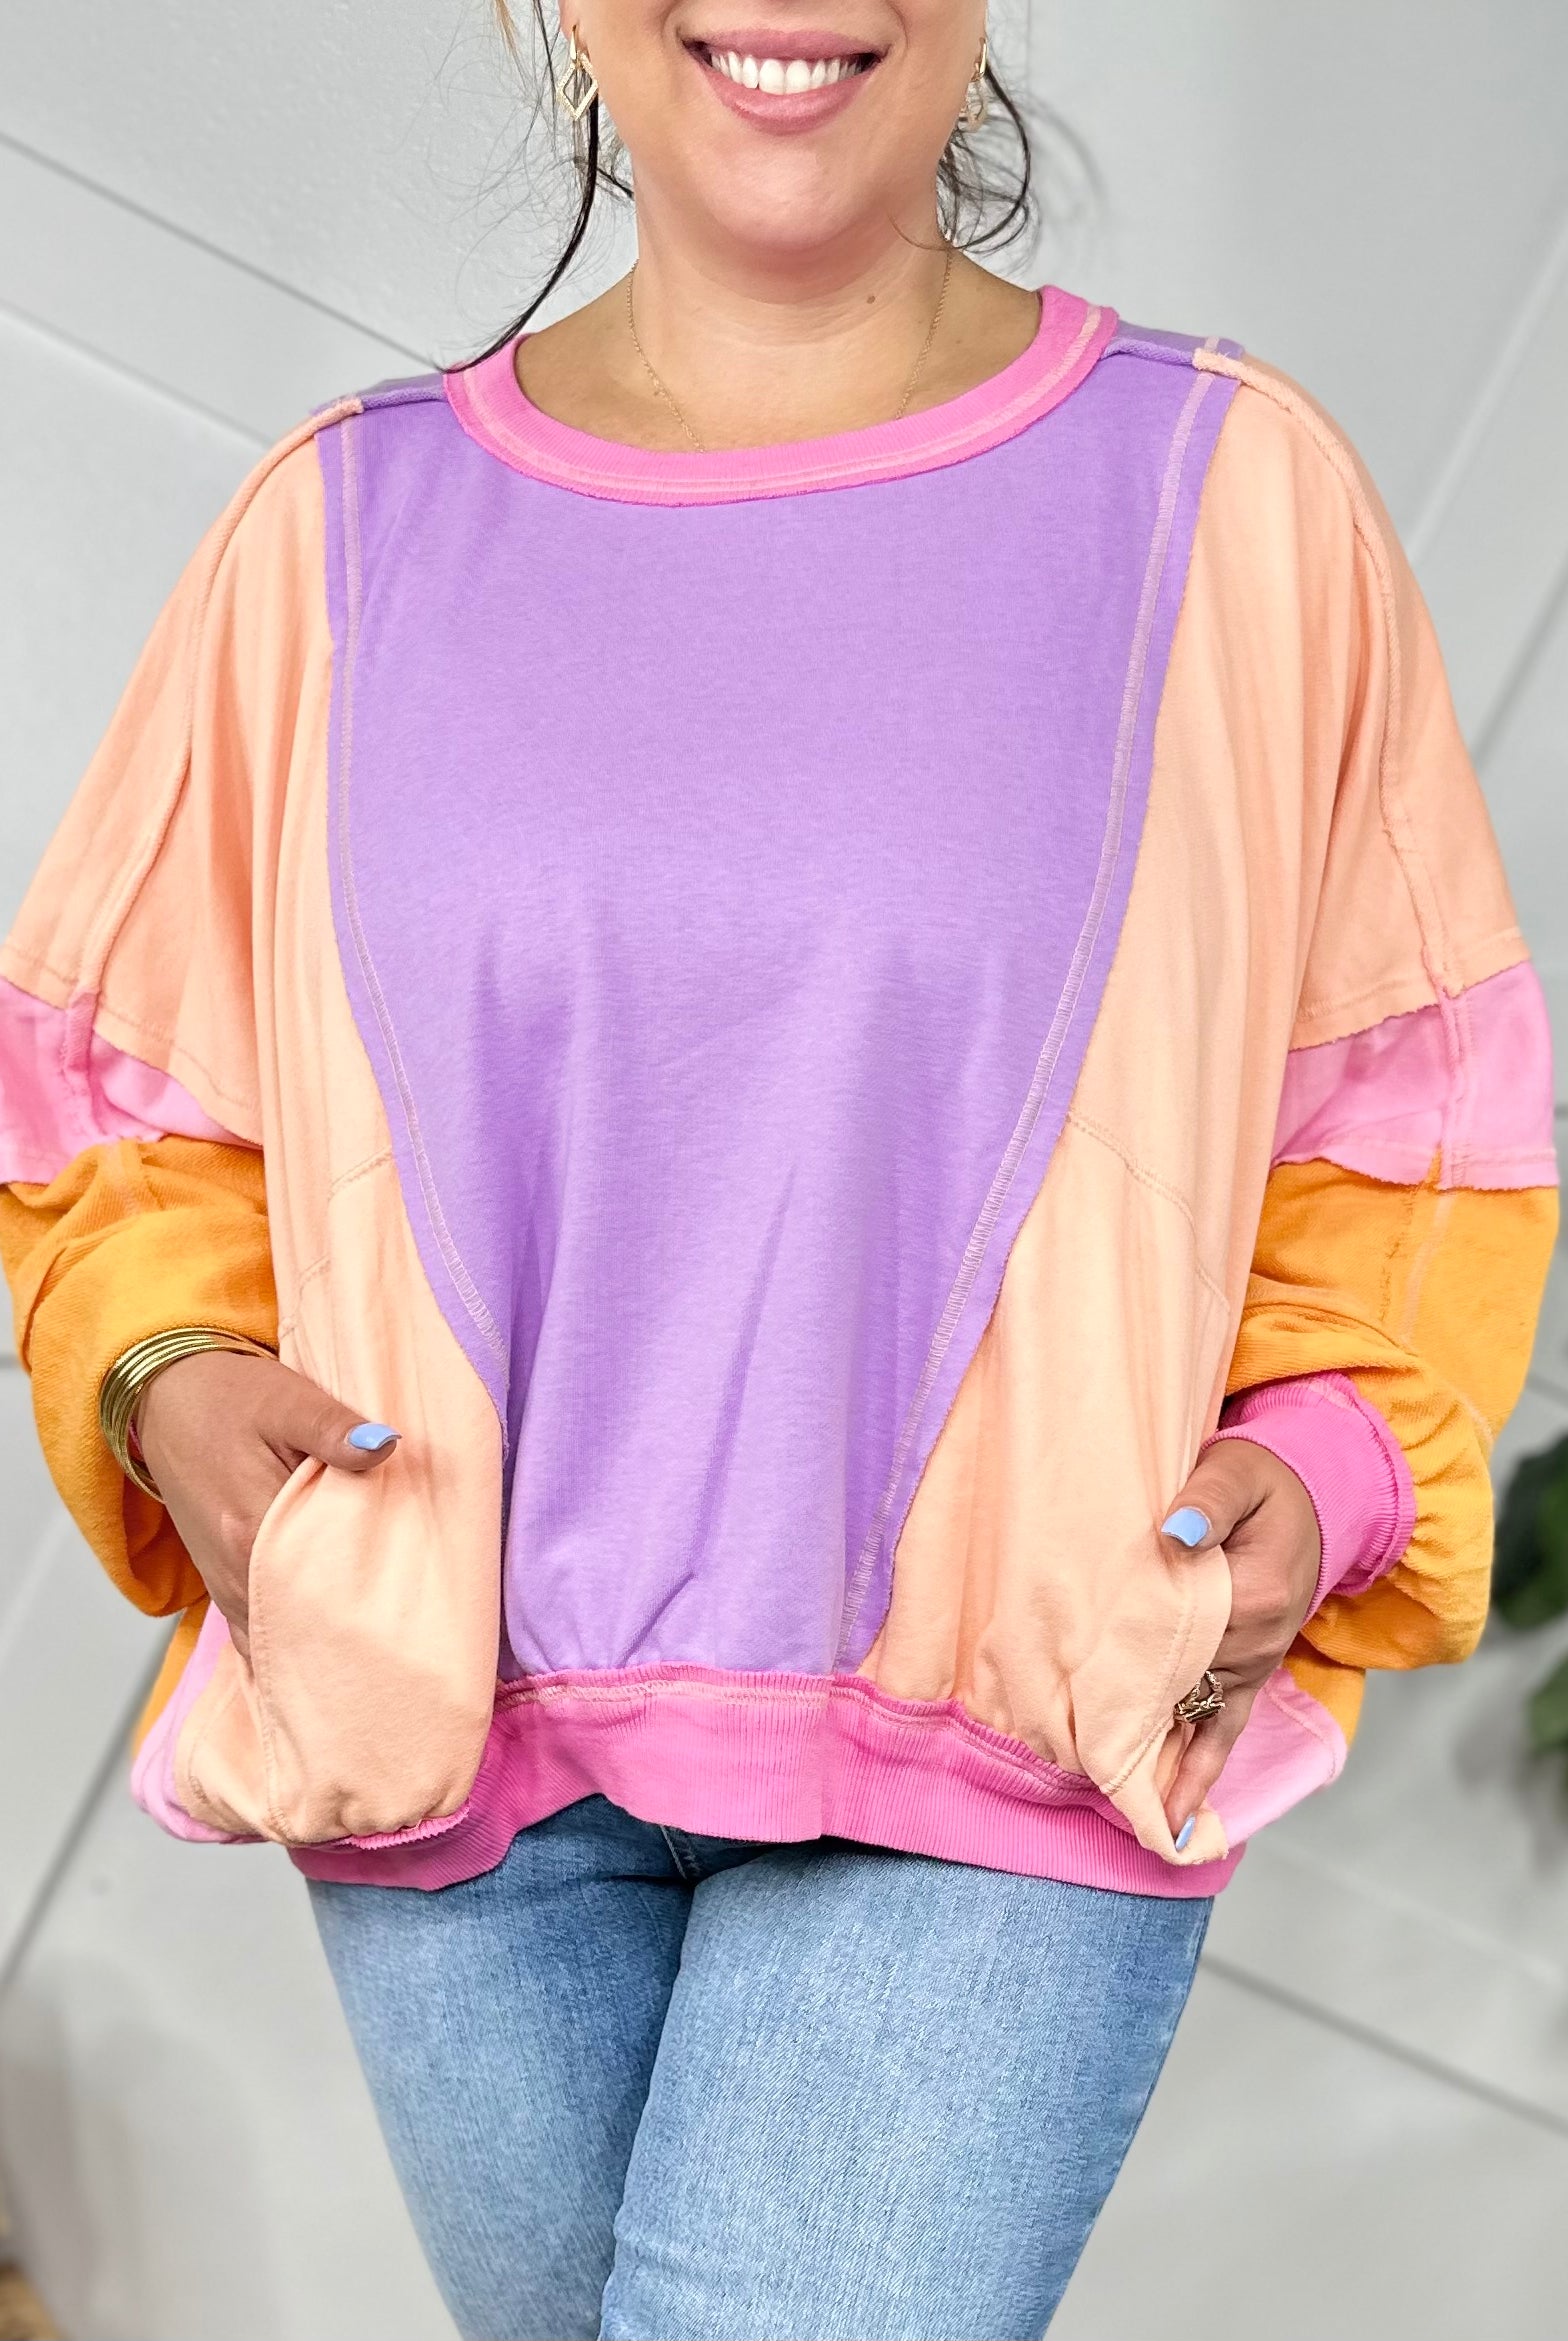 RESTOCK: Kickback Throwback Pullover Top-120 Long Sleeve Tops-Bibi-Heathered Boho Boutique, Women's Fashion and Accessories in Palmetto, FL